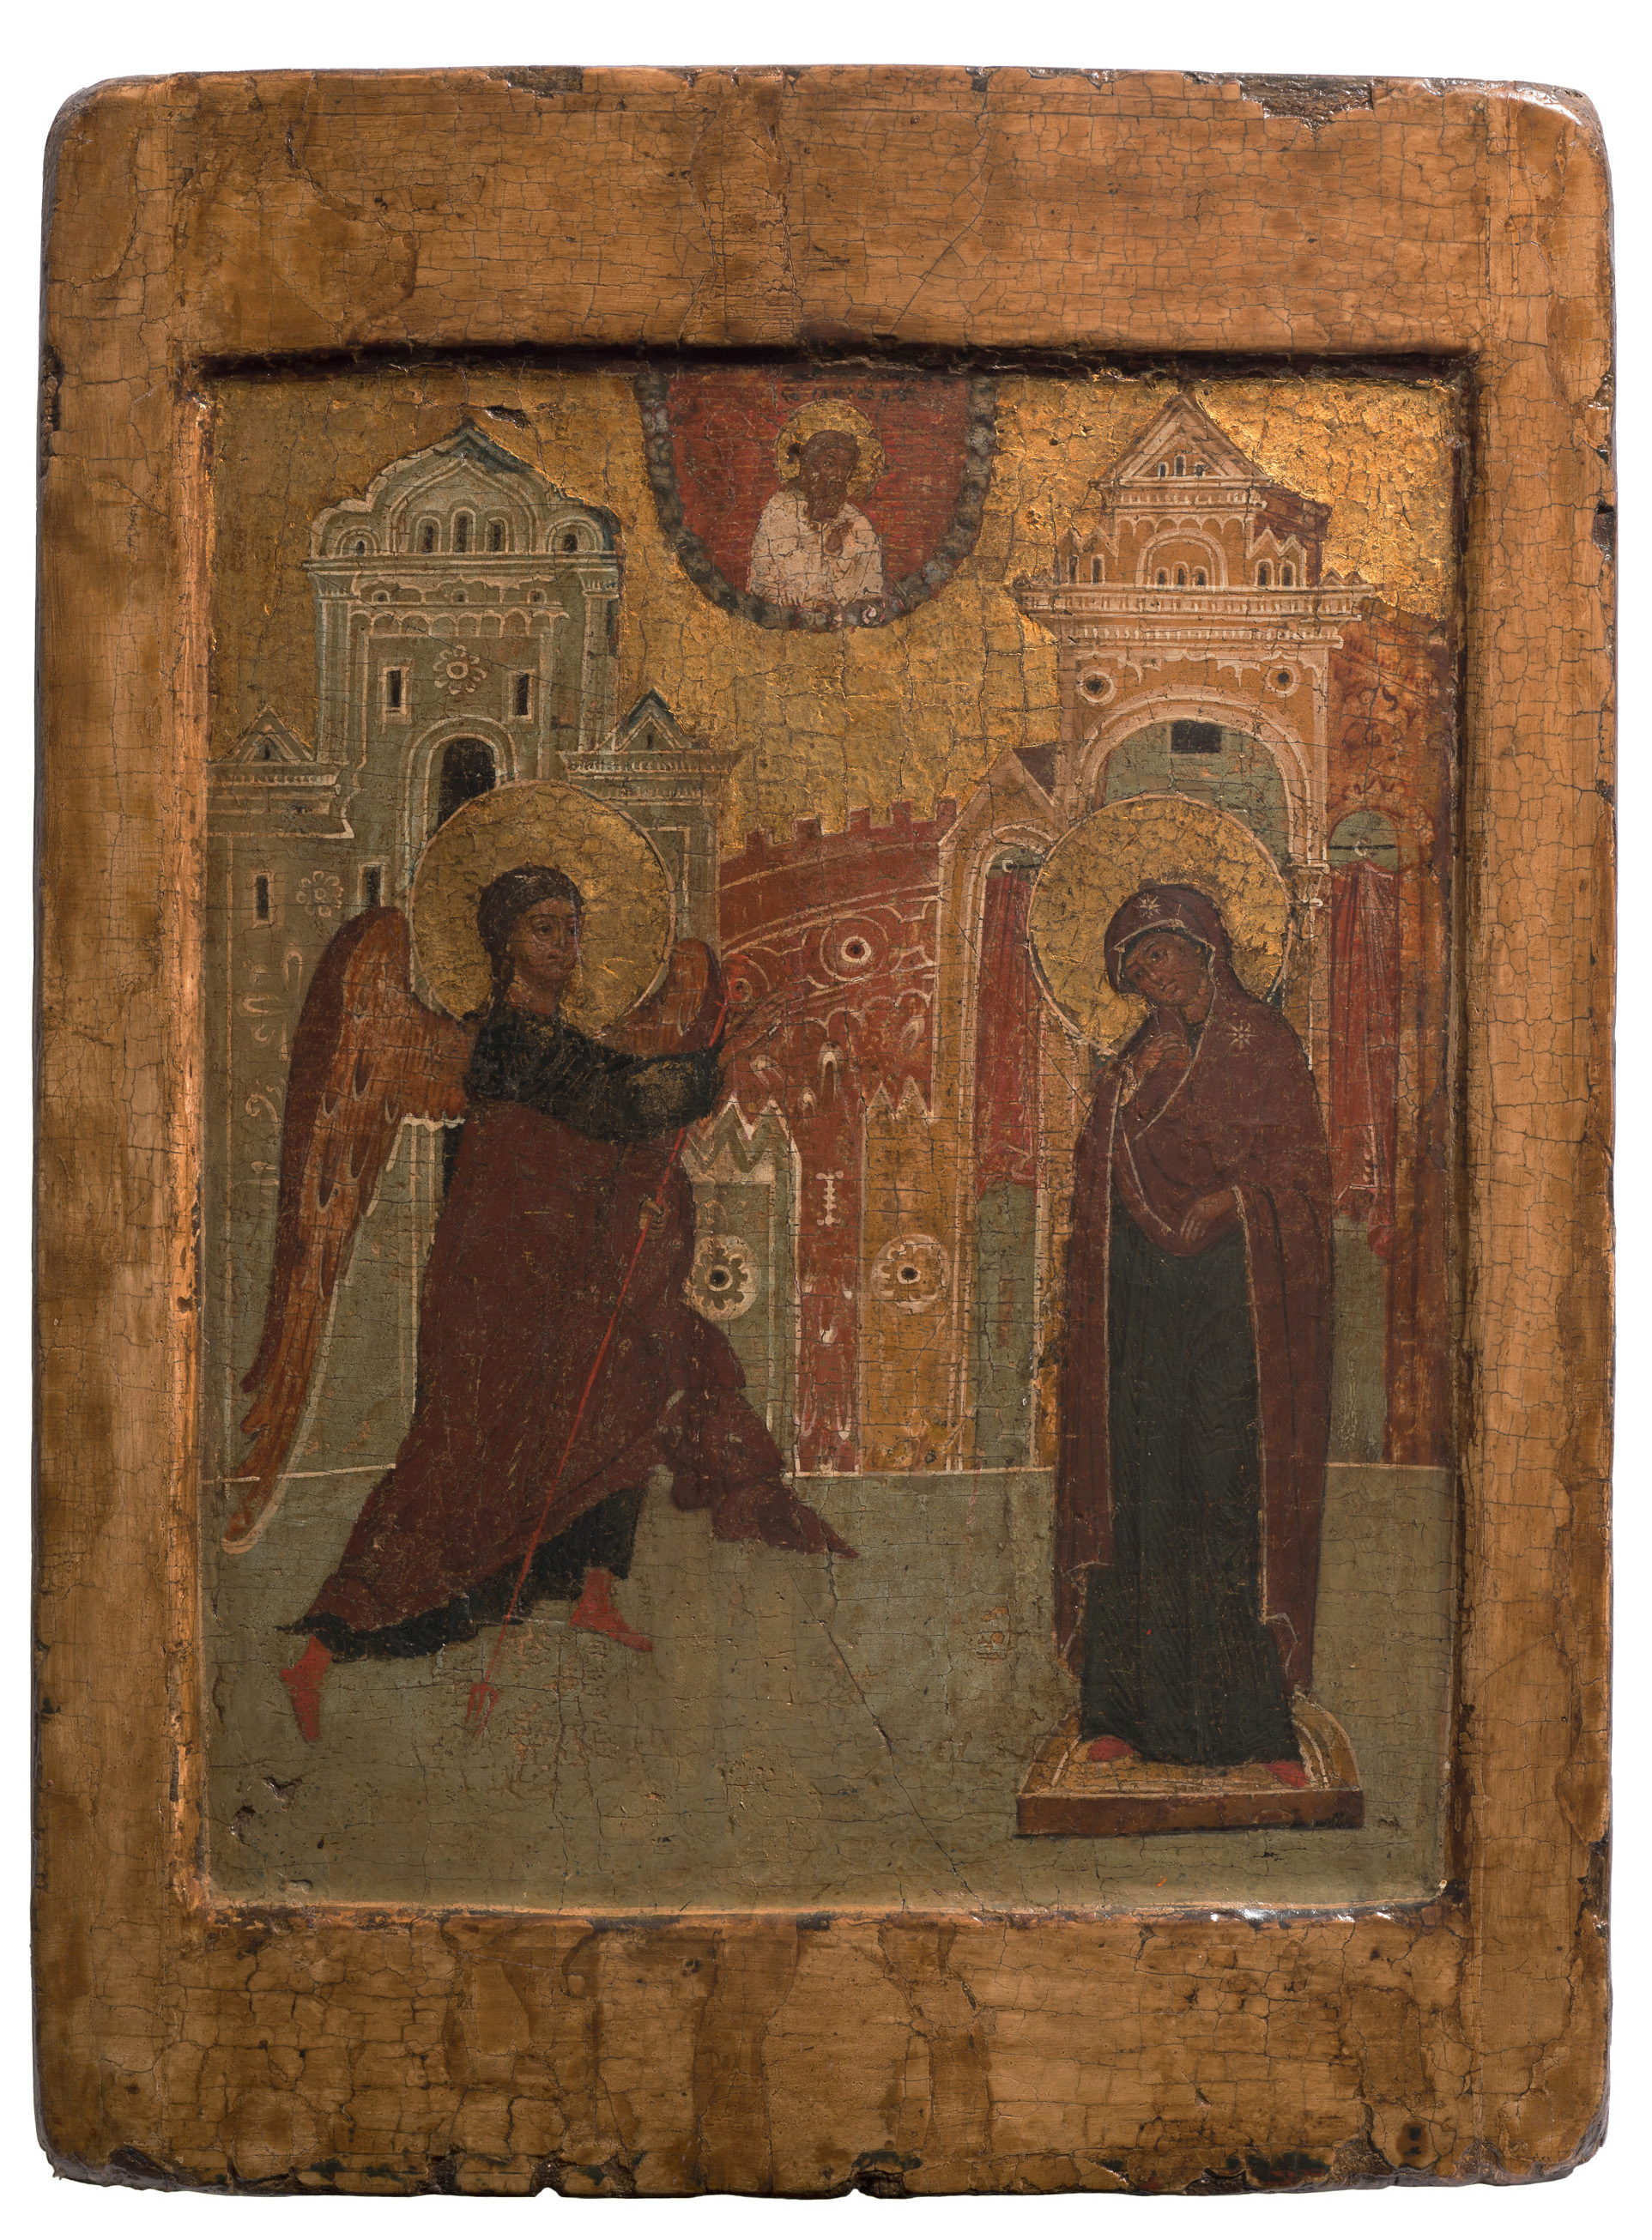 <p><em>Annunciation</em>, Russia, late 17th century, egg tempera and gesso on linen over wood, private collection, Canberra</p>